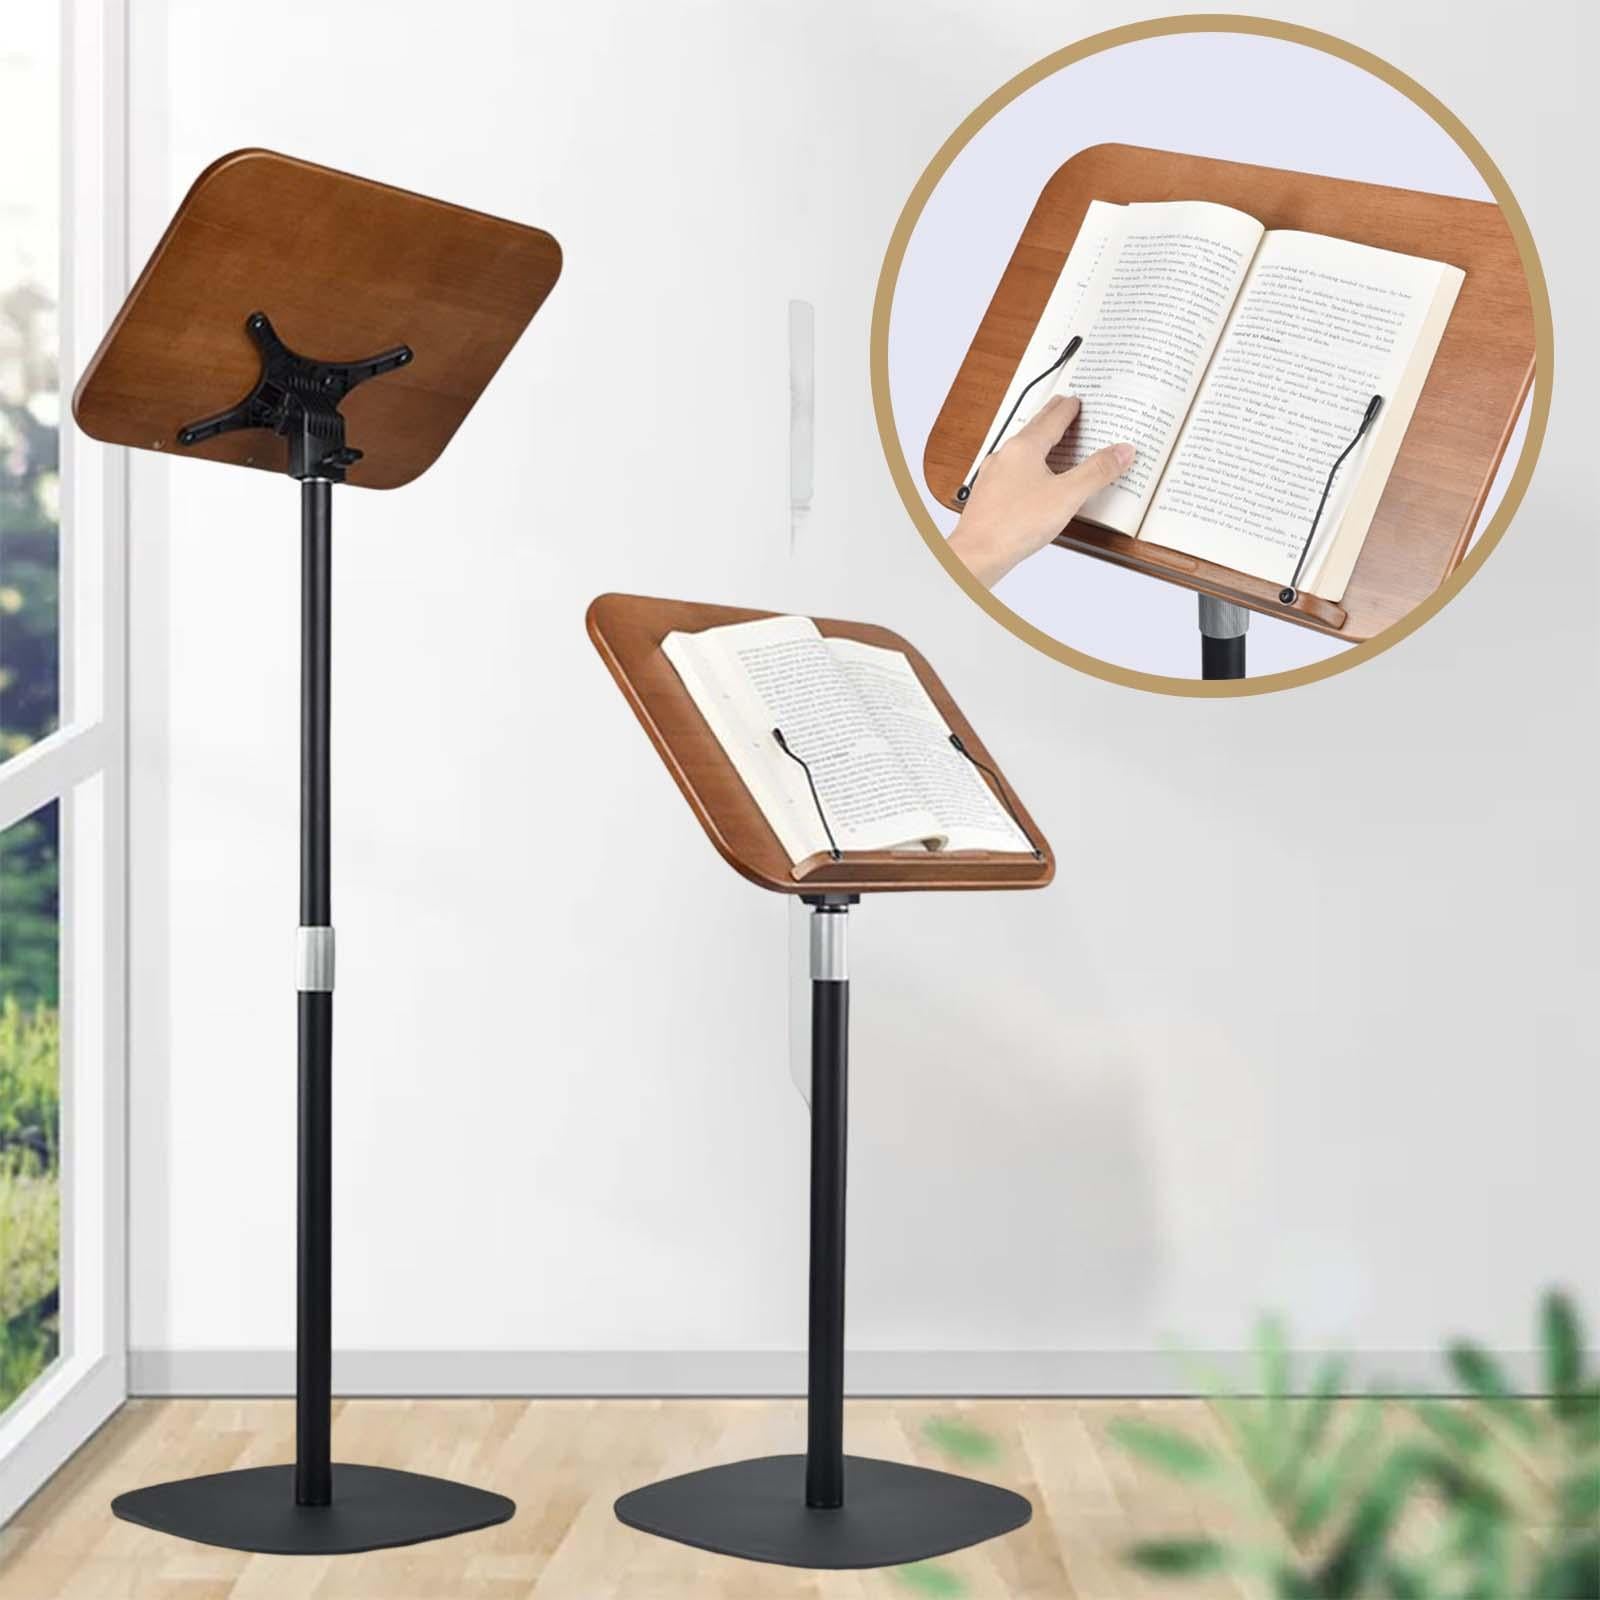 Floor Book Stand for Reading Metal Support for Home Office kitchen Heightening